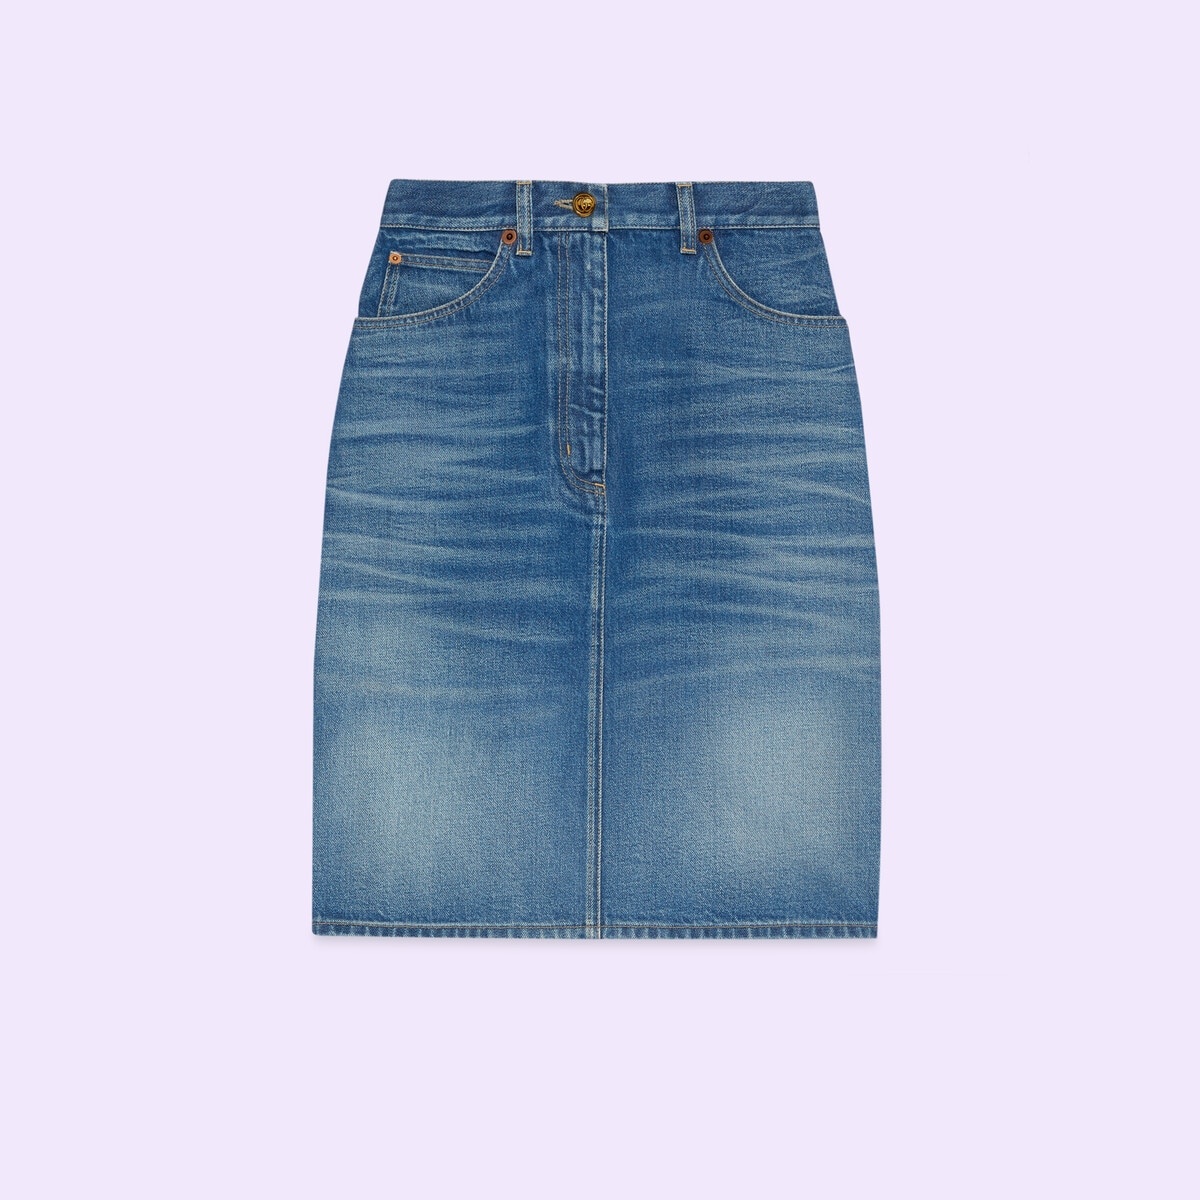 GUCCI Denim skirt with Gucci label | REVERSIBLE